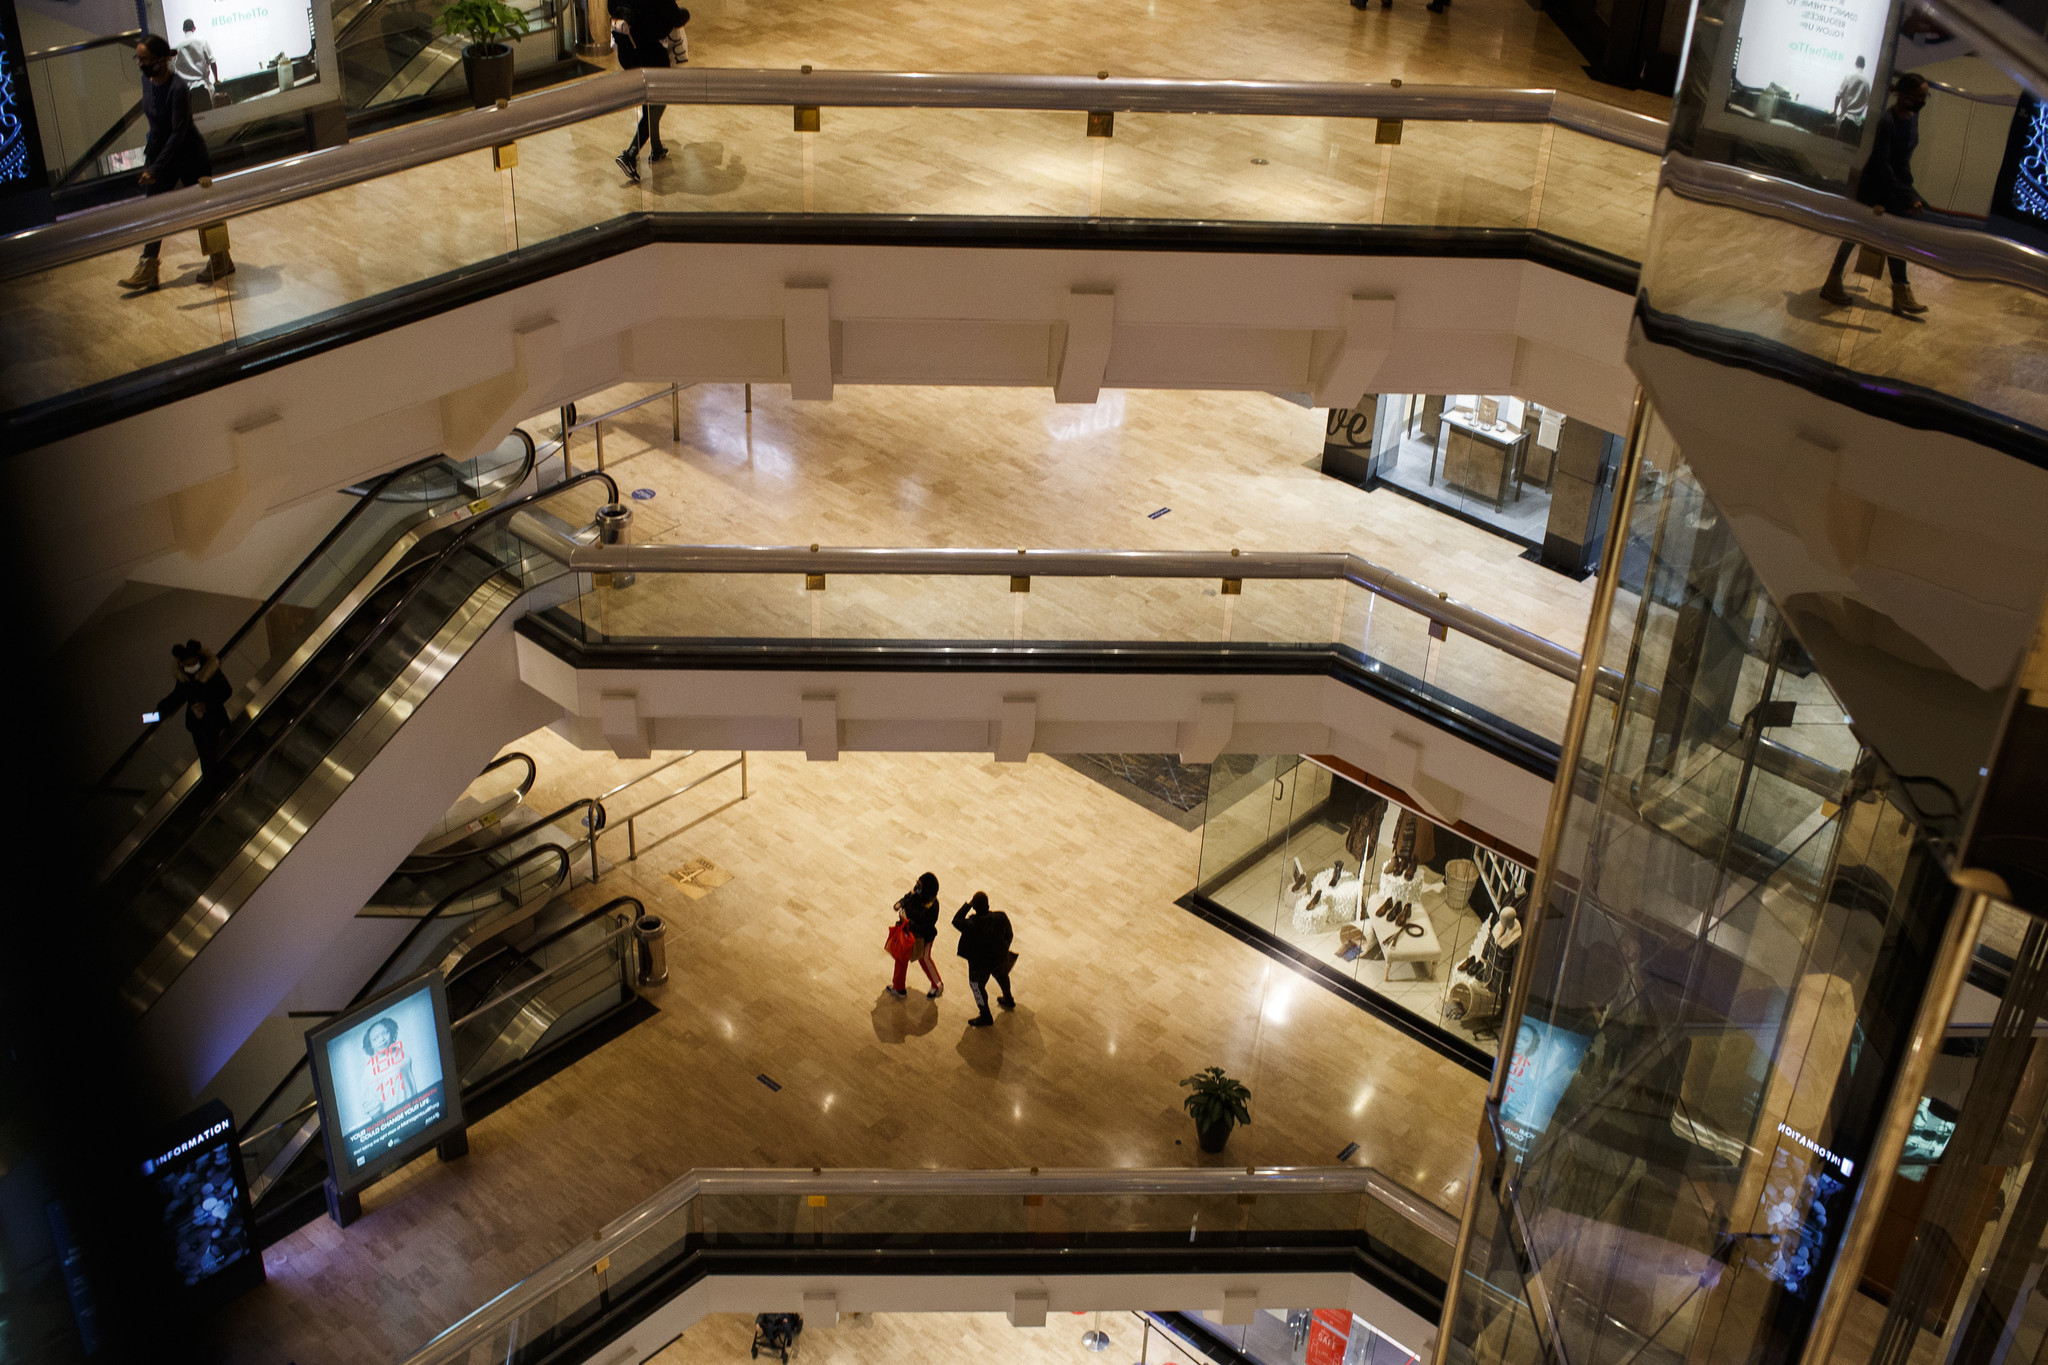 Does This Mall In Illinois Still Have A Chance At Thriving?